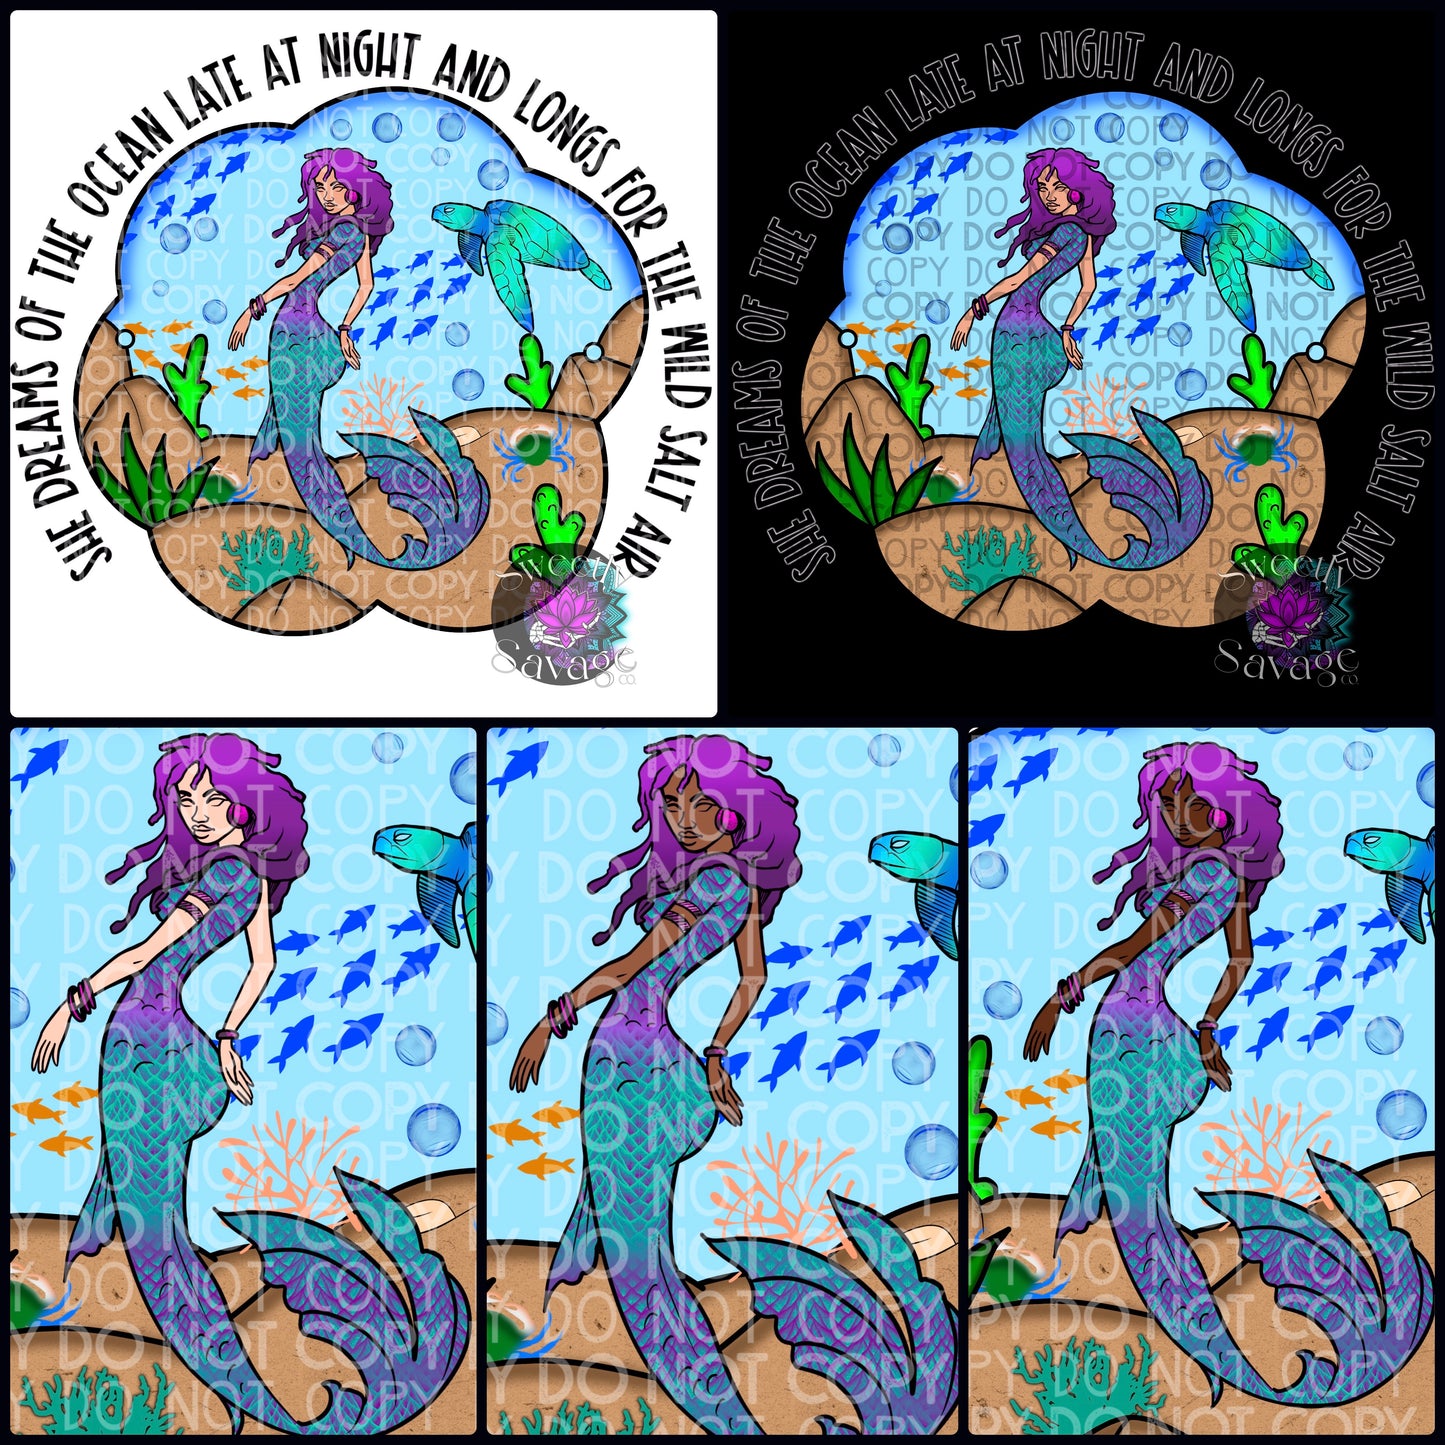 She dreams of the ocean Png File